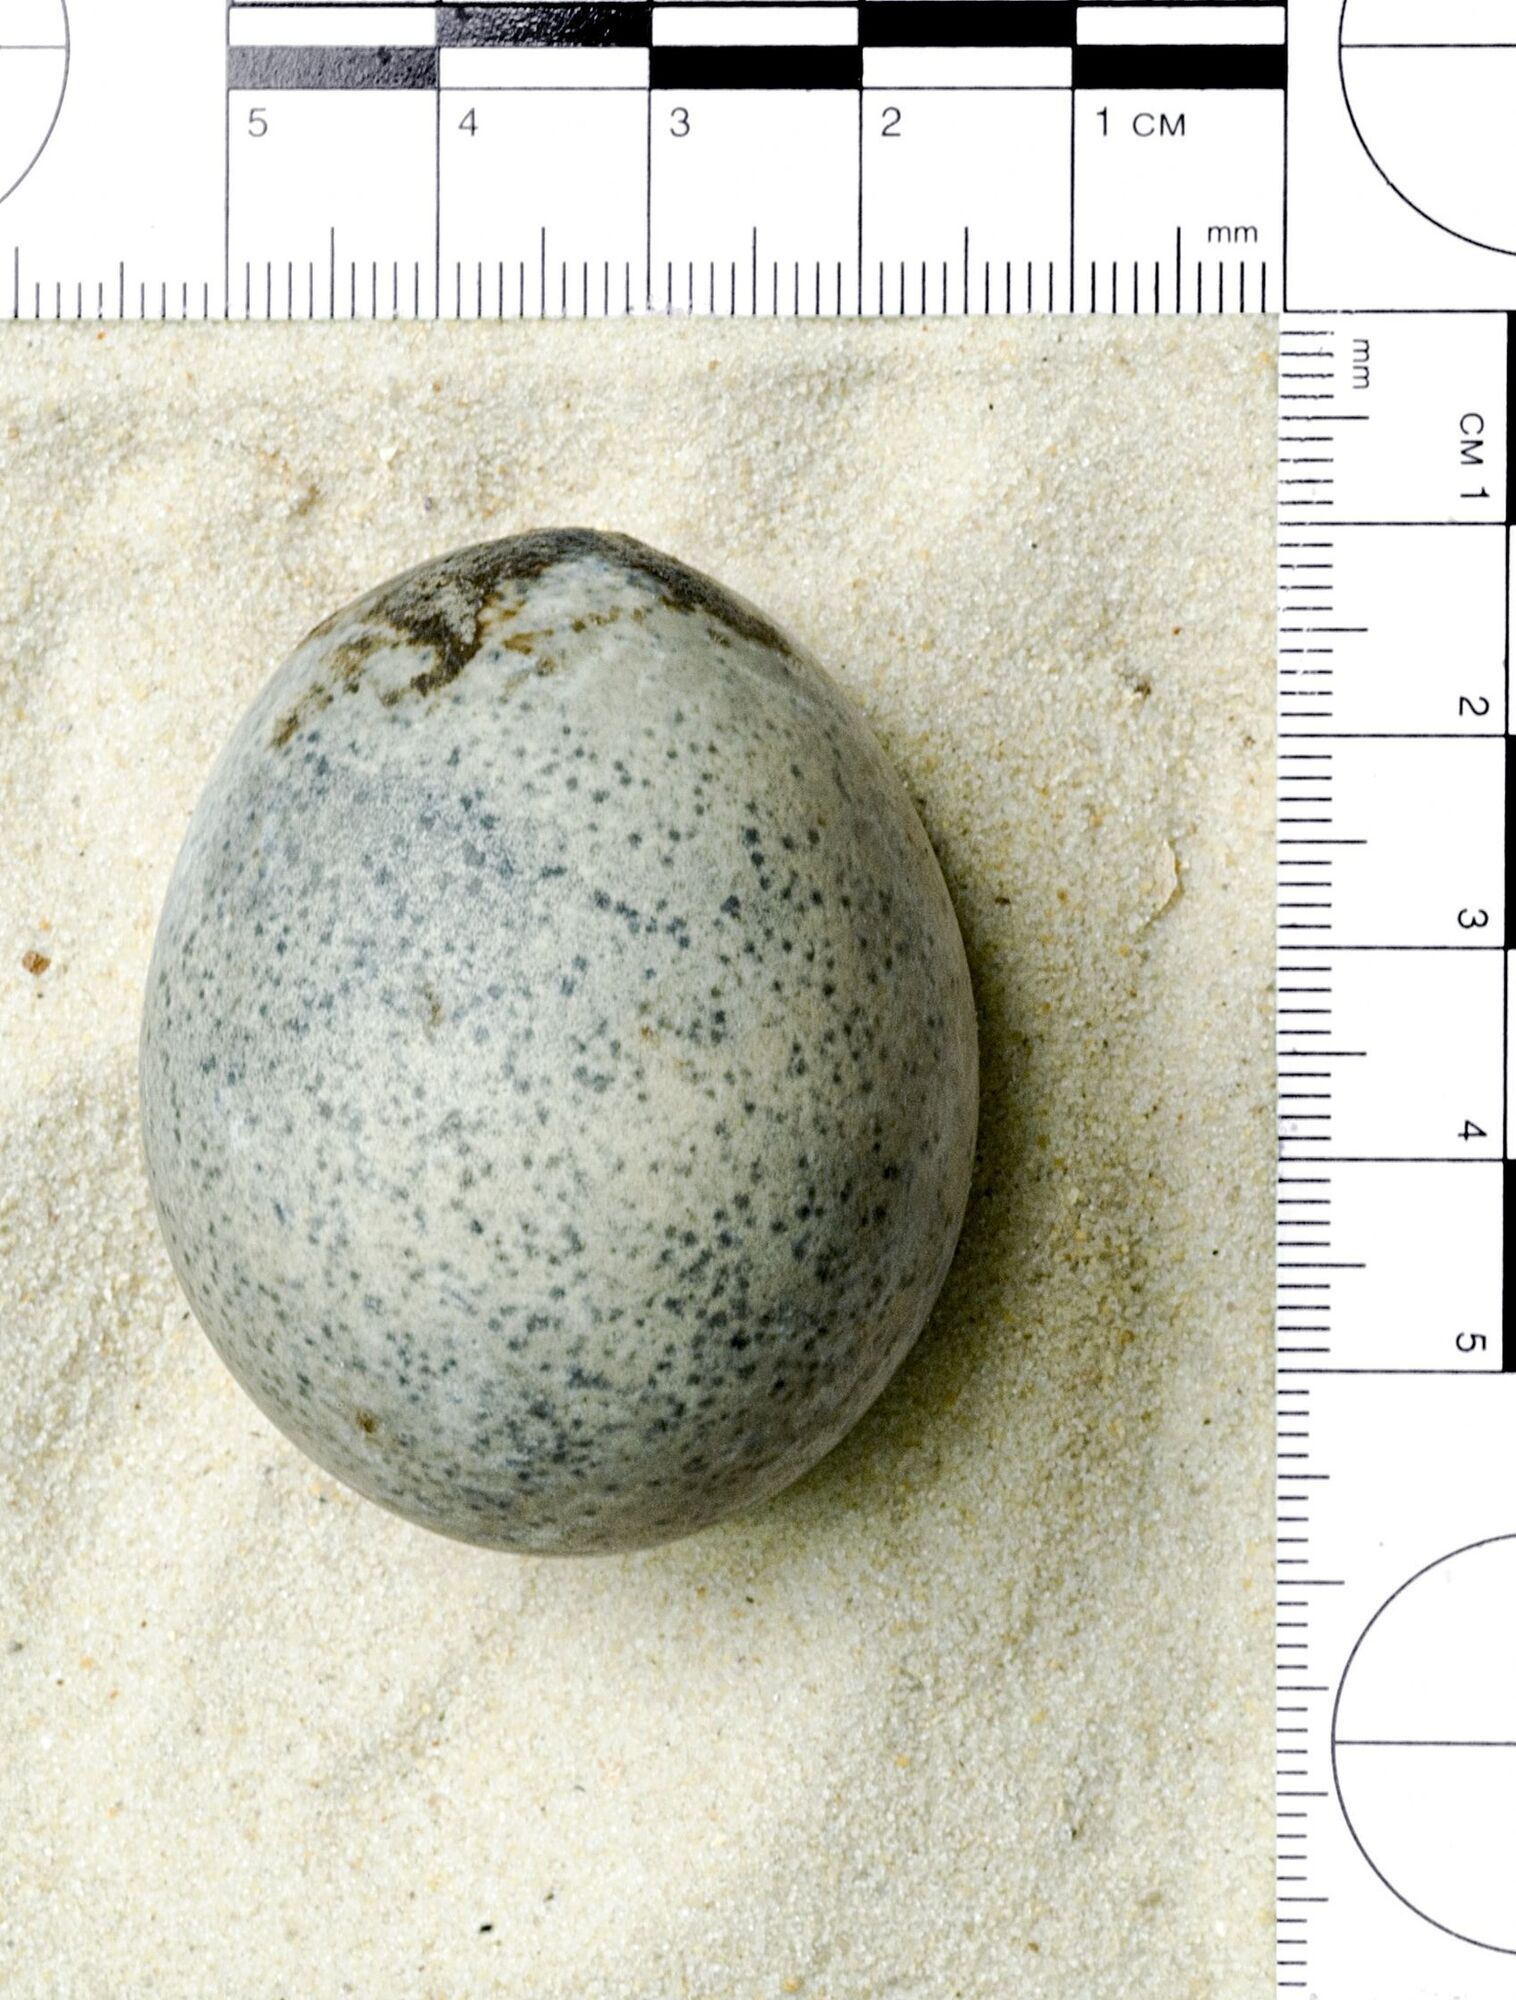 Archaeologists find intact egg with yolk inside, 1700 years old (photo)